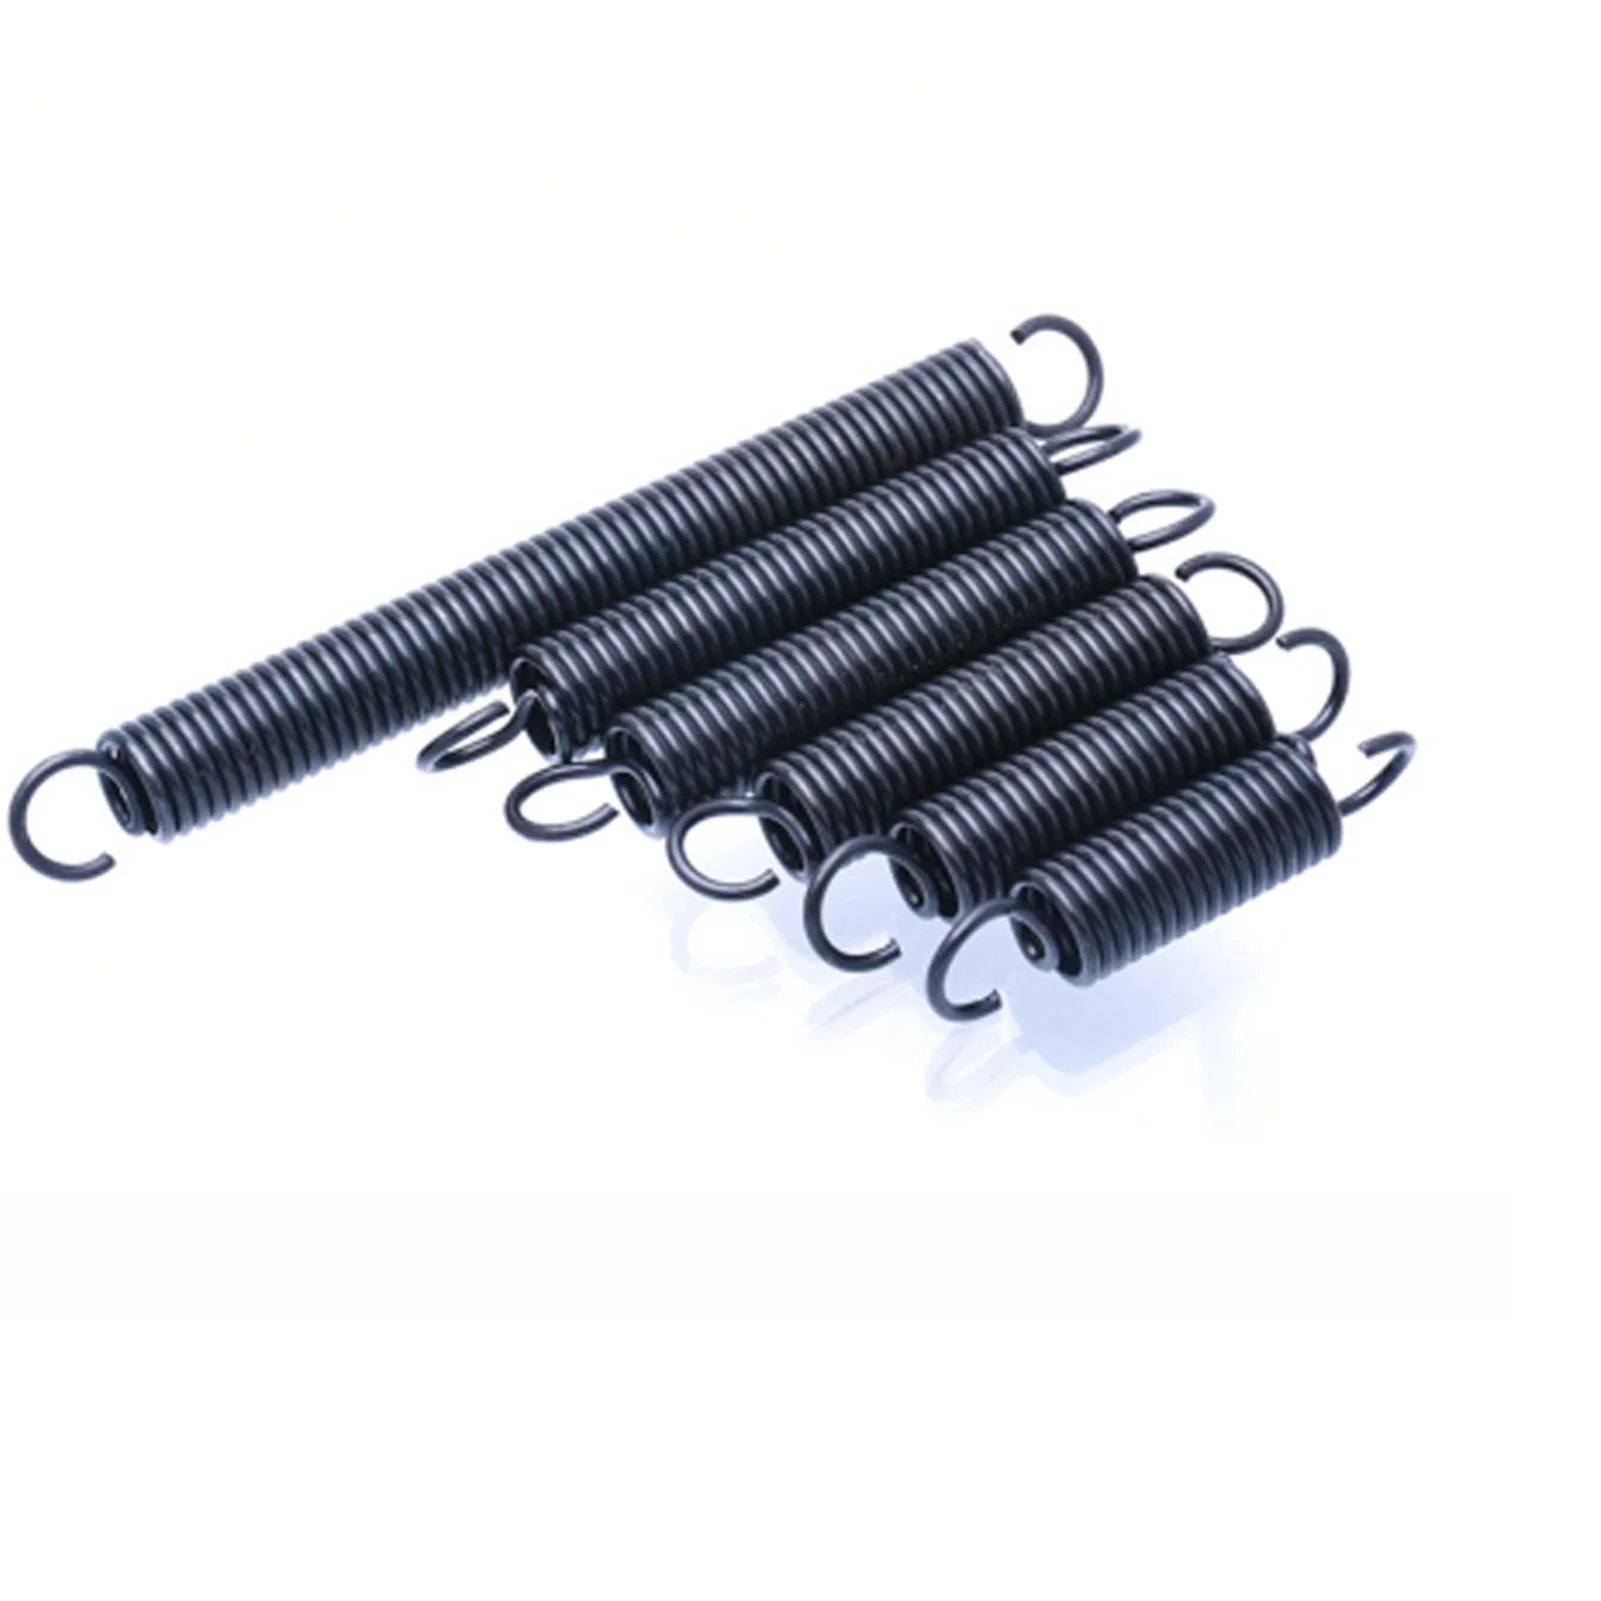 

Spring 2pcs, Wire Dia 1.2mm Outer Dia 14mm Length 50-200mm,steel Tension spring, with Dual hook Small extension pull springs